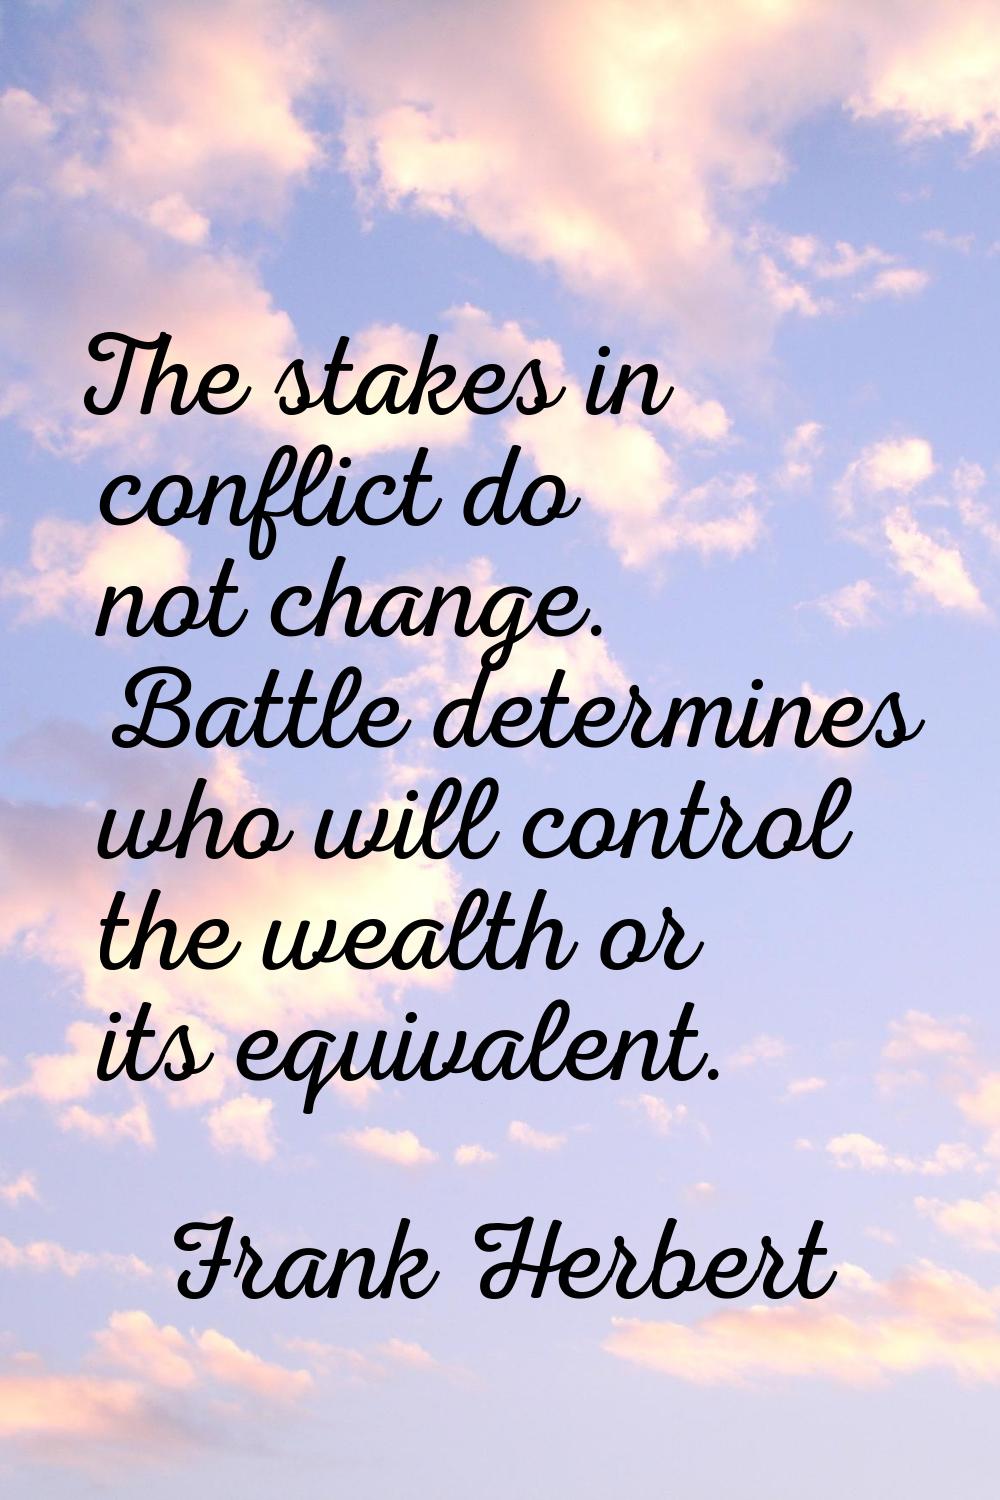 The stakes in conflict do not change. Battle determines who will control the wealth or its equivale